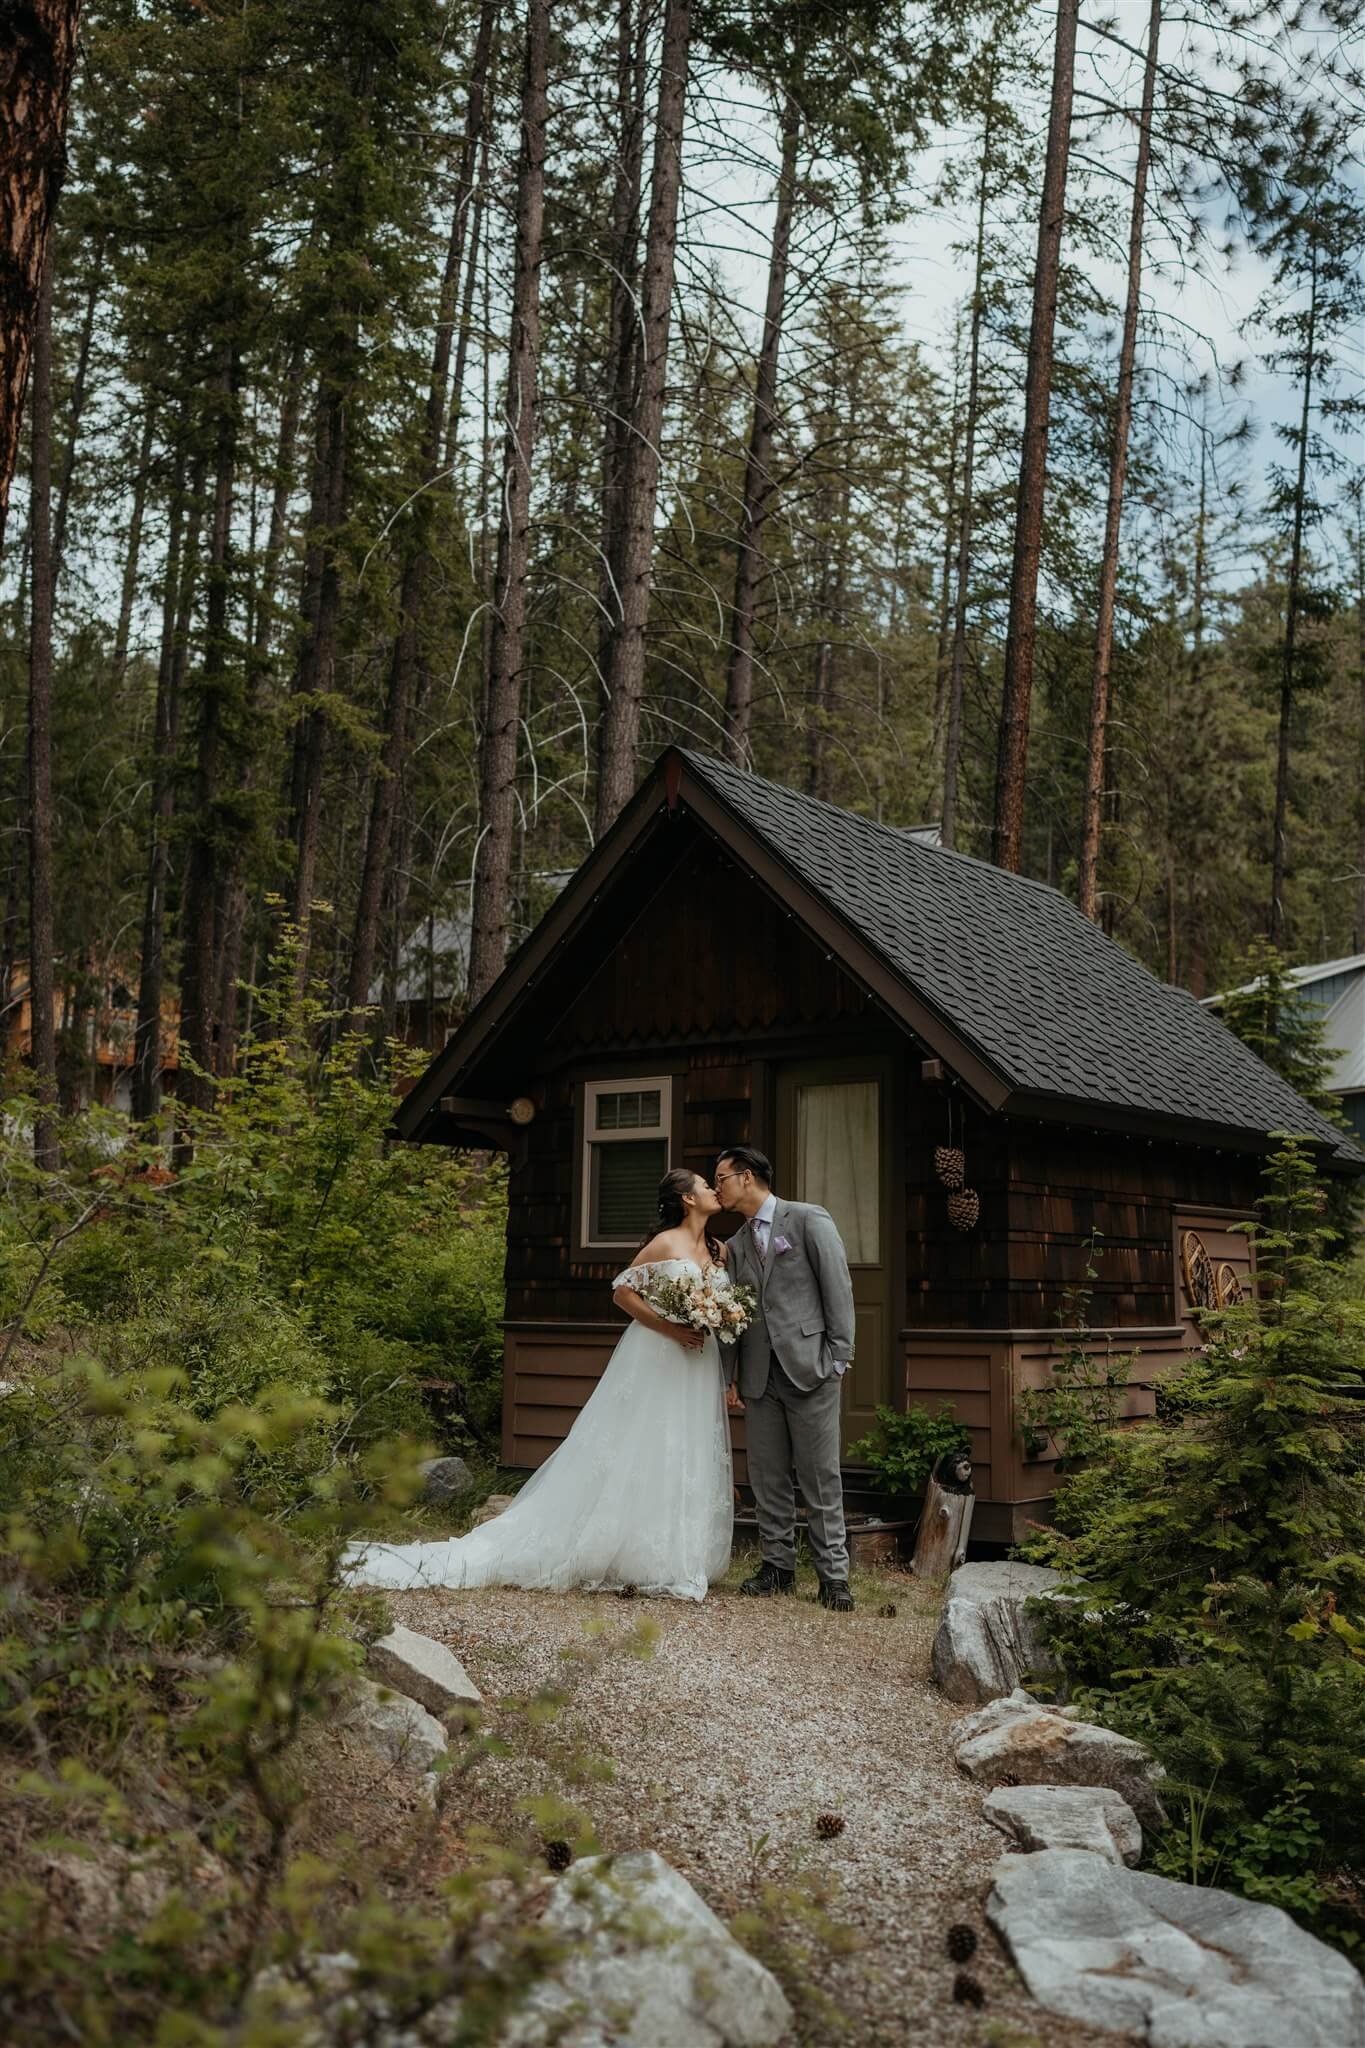 Bride and groom kiss in front of cabin in the North Cascades forest